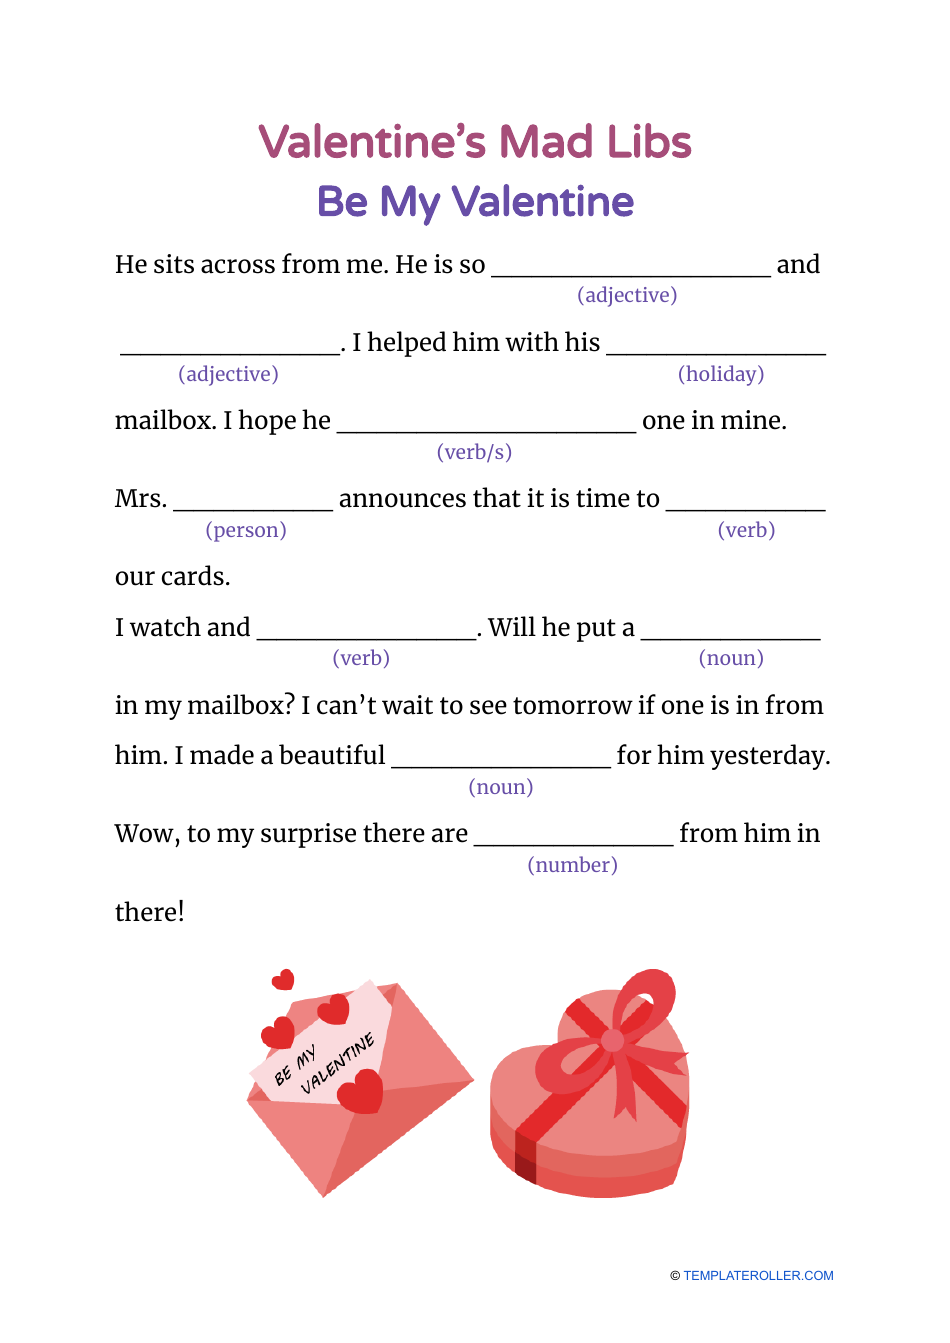 Valentine's Day Mad Libs - Be My Valentine Cover Image